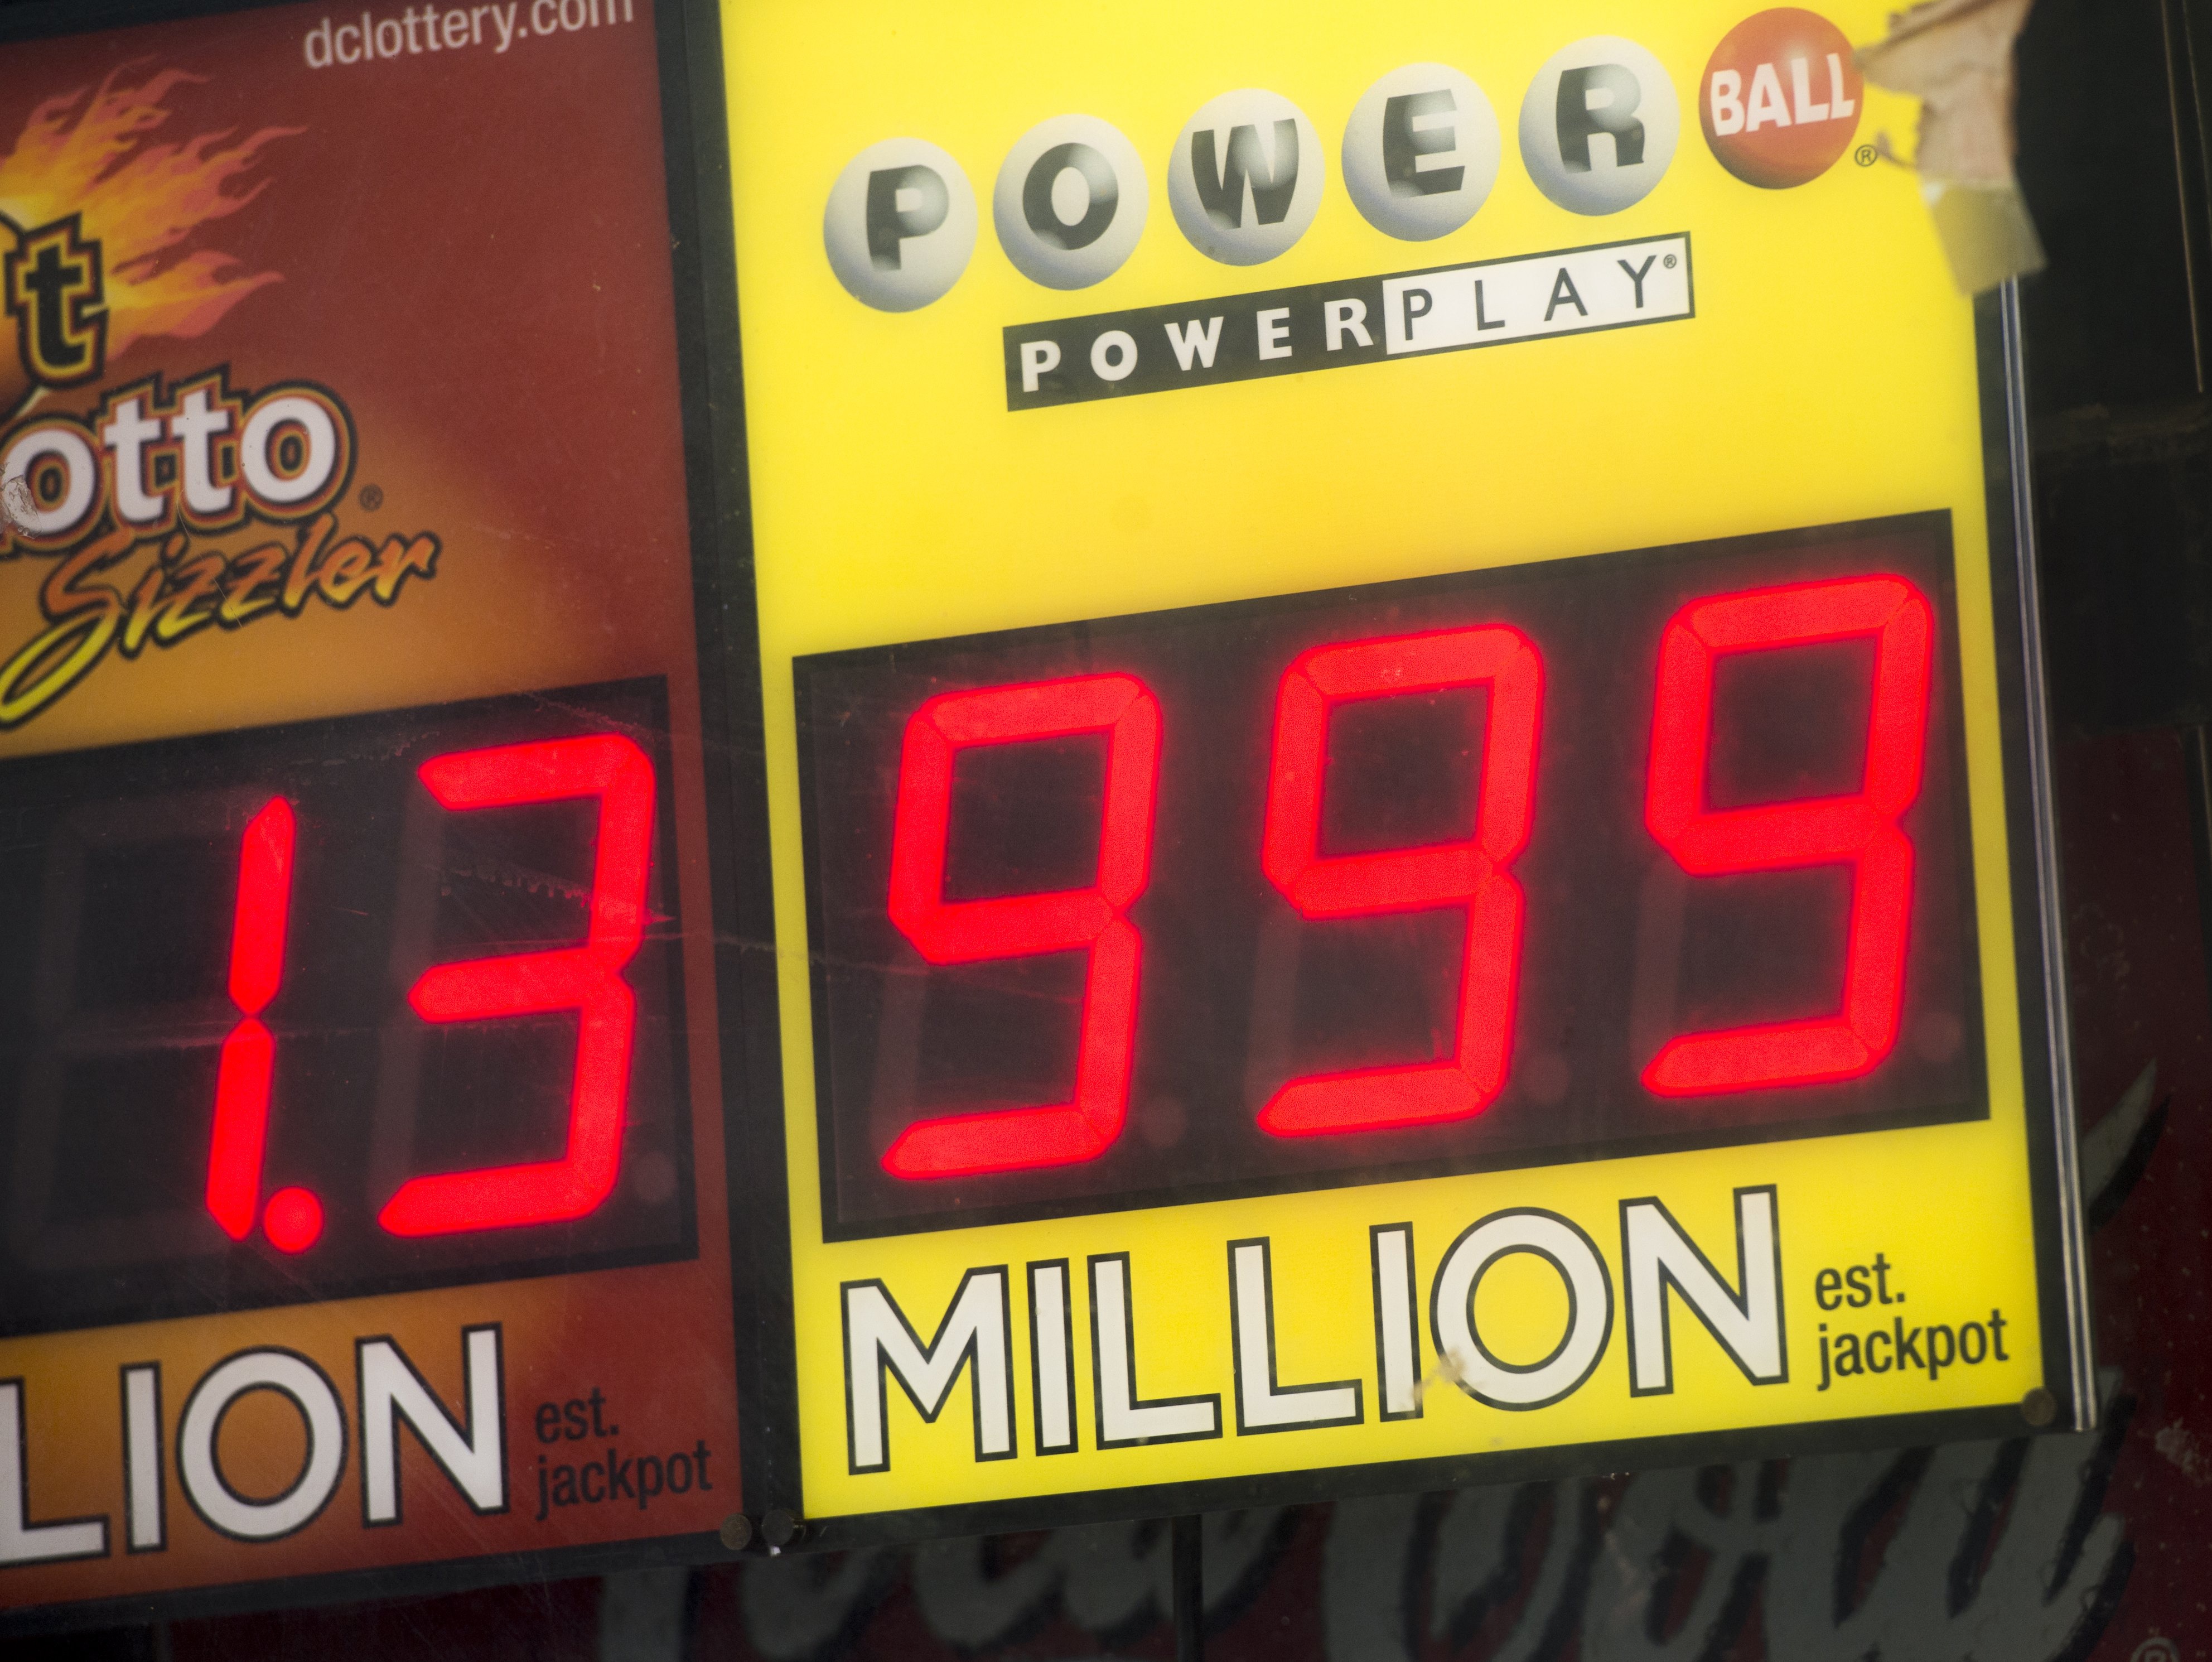 A sign showing a Powerball prize of $999 million, the largest jackpot winnings that the Powerball sign can display, with the actual Powerball jackpot estimated at $1.3 billion, outside a deli in Washington, DC on Jan 11. (Saul Loeb—AFP/Getty Images)